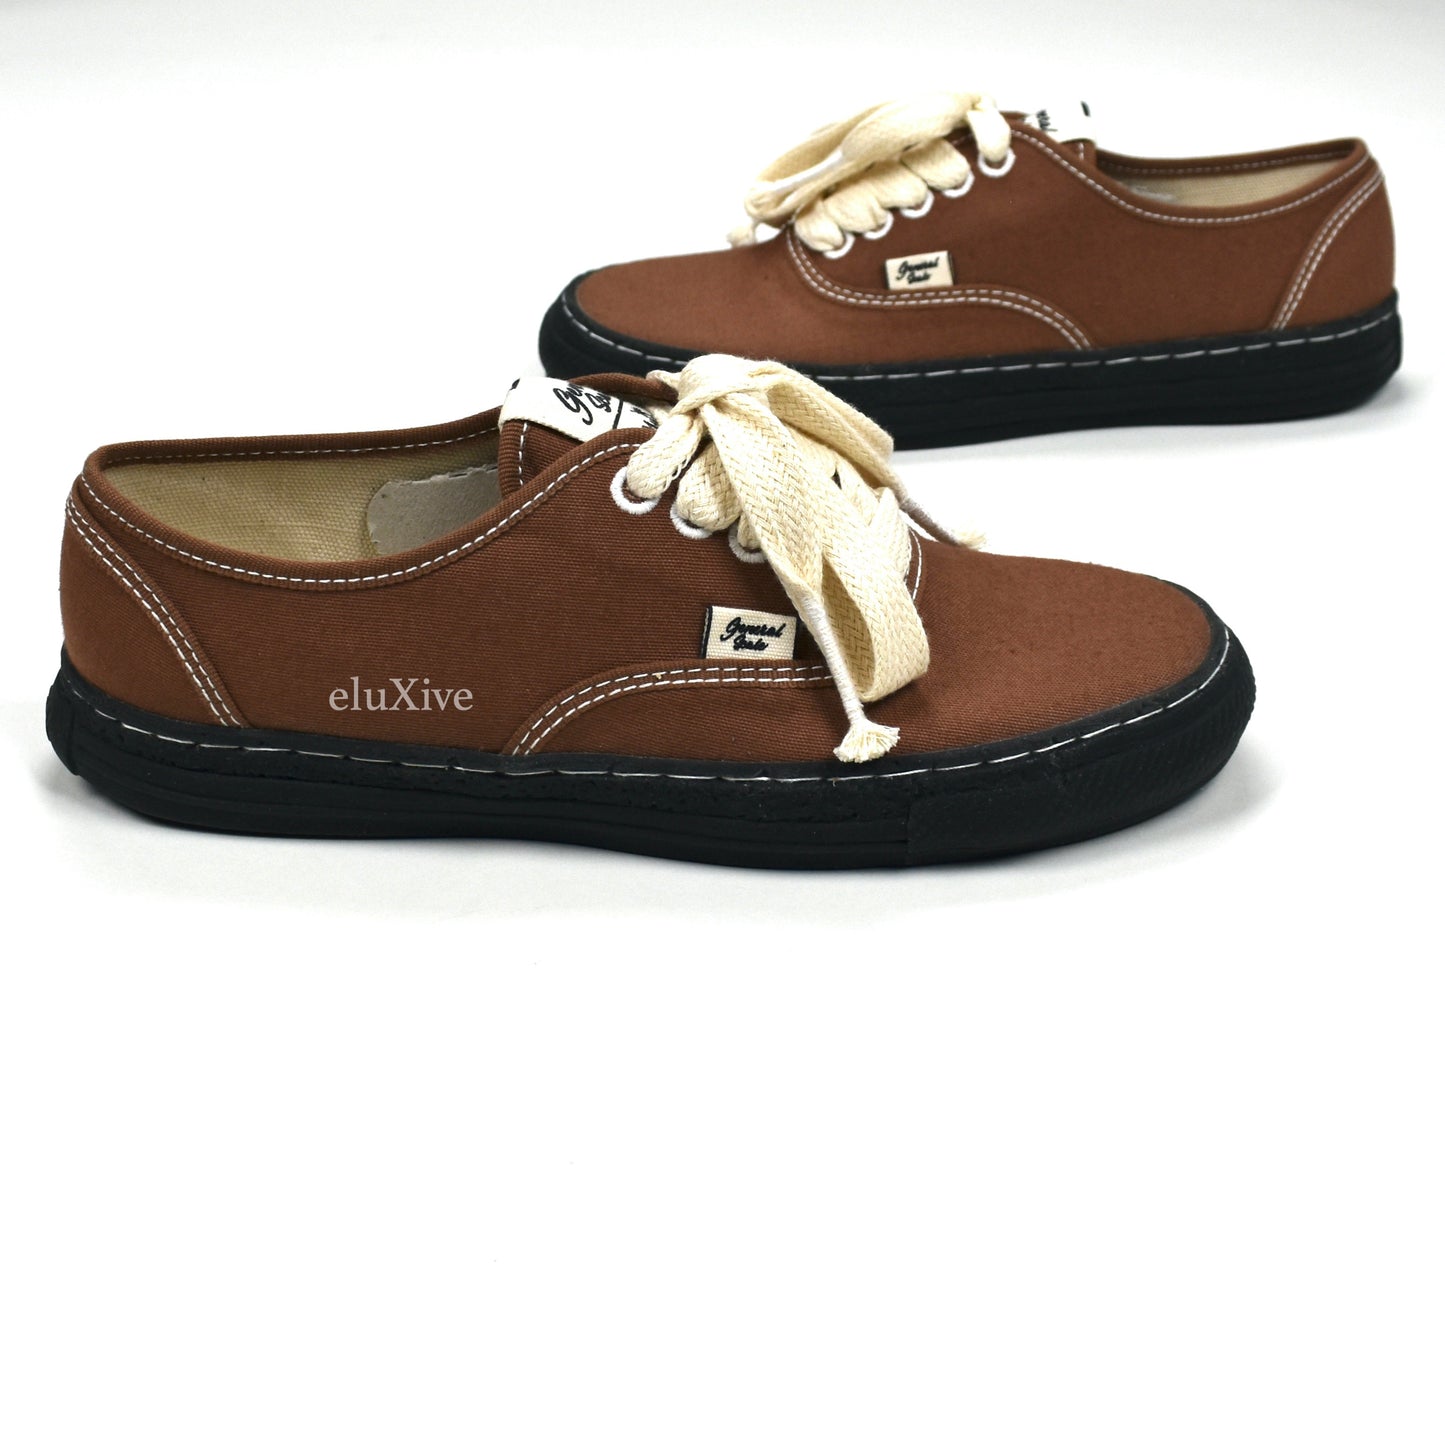 Maison Mihara Yasuhiro - MMY General Scale Sneakers (Brown)